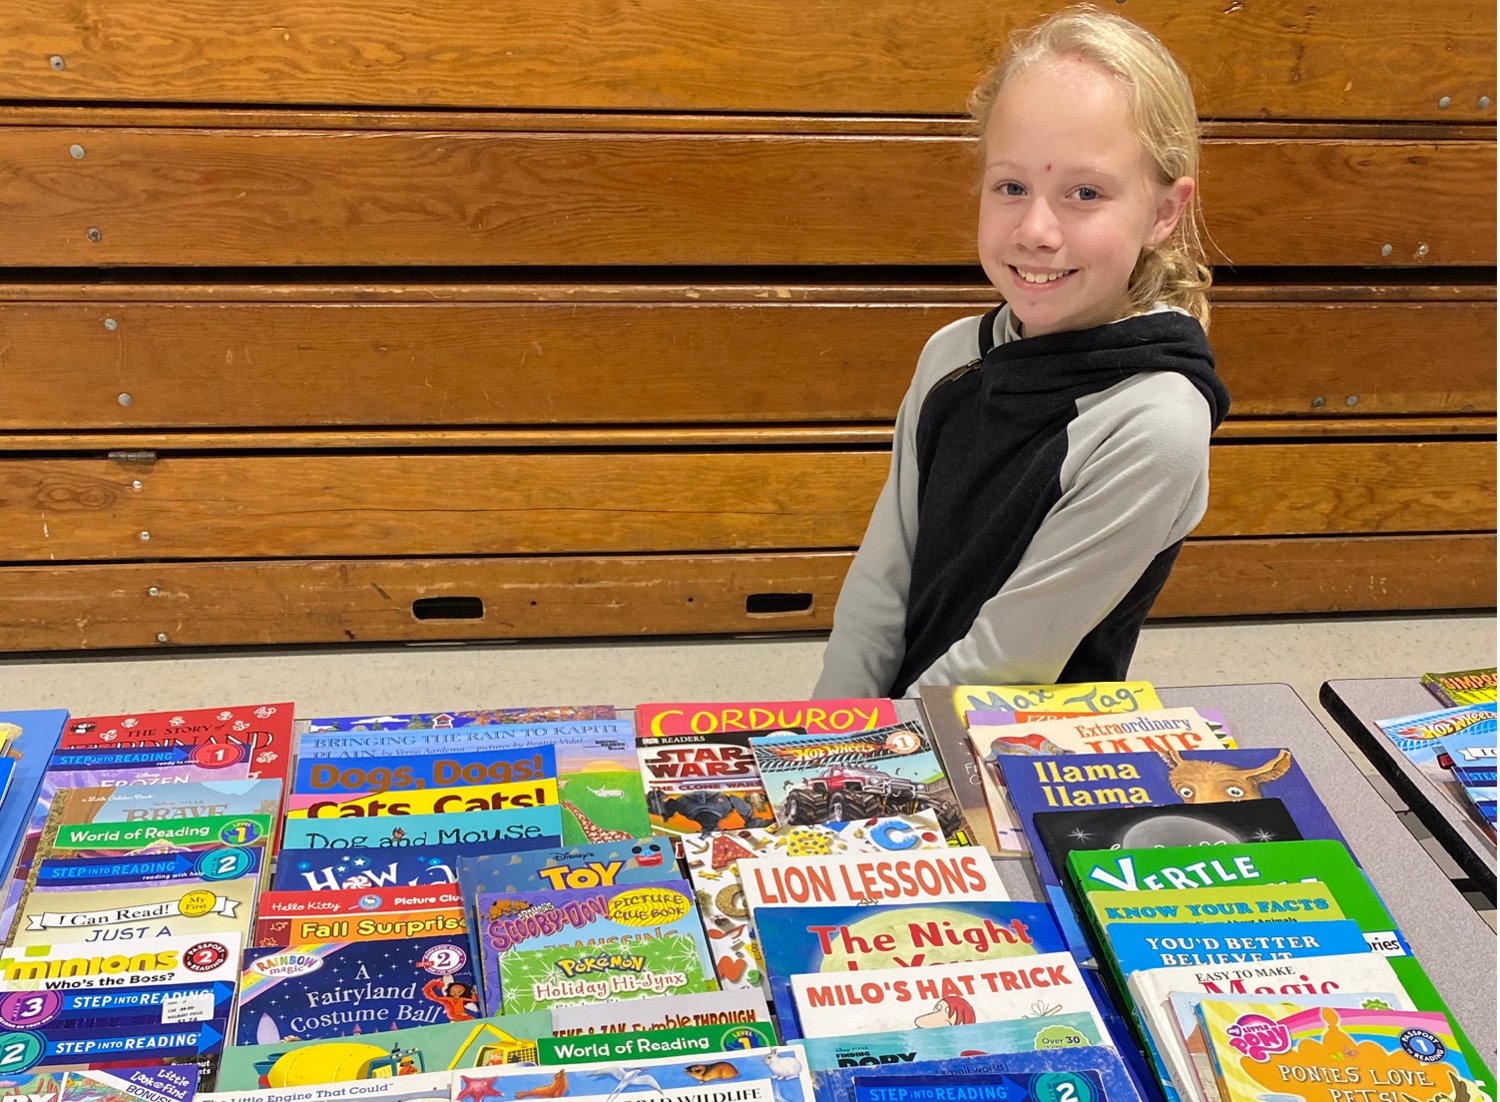 Laura Ingalls Wilder Elementary 5th grade student, Hayden Armstead, recently organized a book drive in the elementary school. Students donated over 200 gently-used books from their homes to be redistributed to others. Armstead loves reading and wanted to help others find books to enjoy.